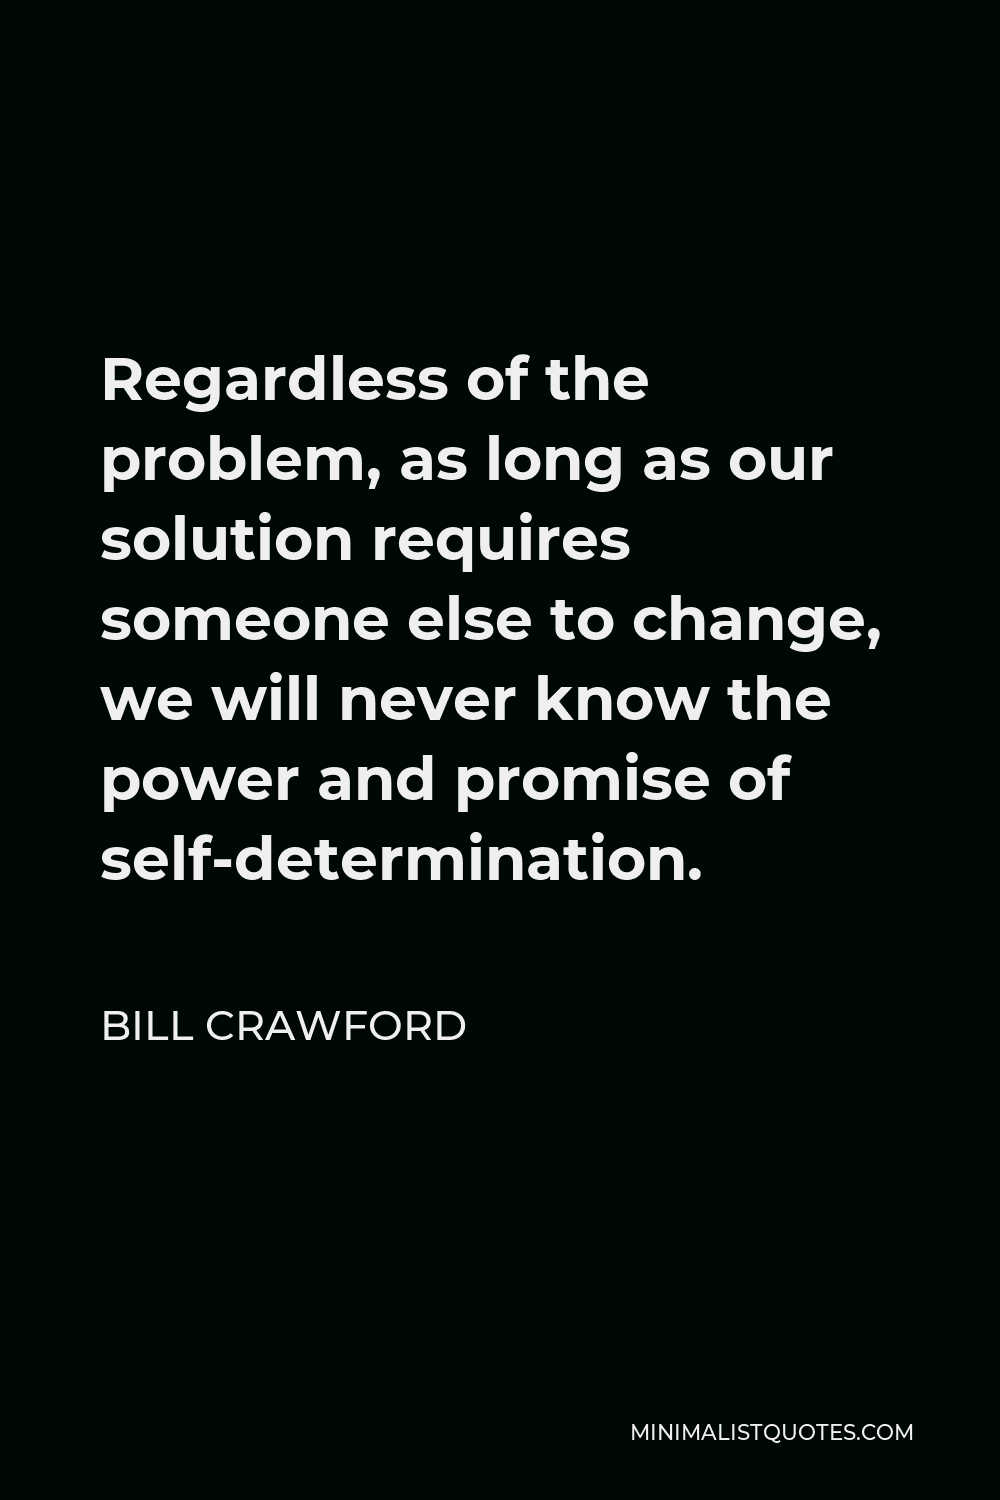 Bill Crawford Quote - Regardless of the problem, as long as our solution requires someone else to change, we will never know the power and promise of self-determination.